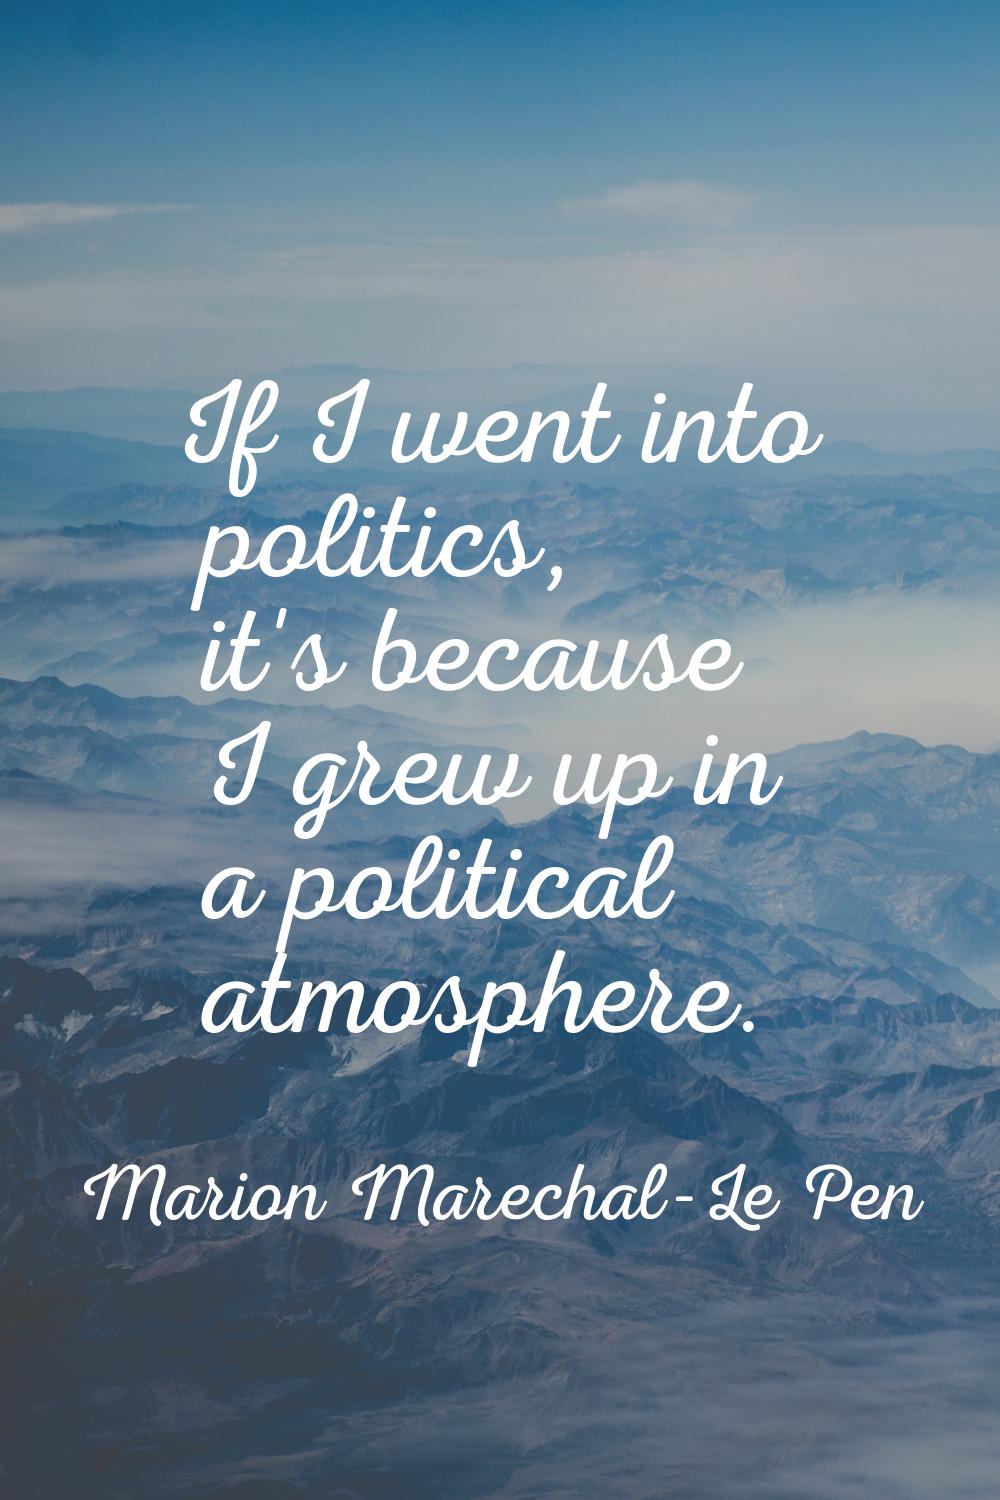 If I went into politics, it's because I grew up in a political atmosphere.